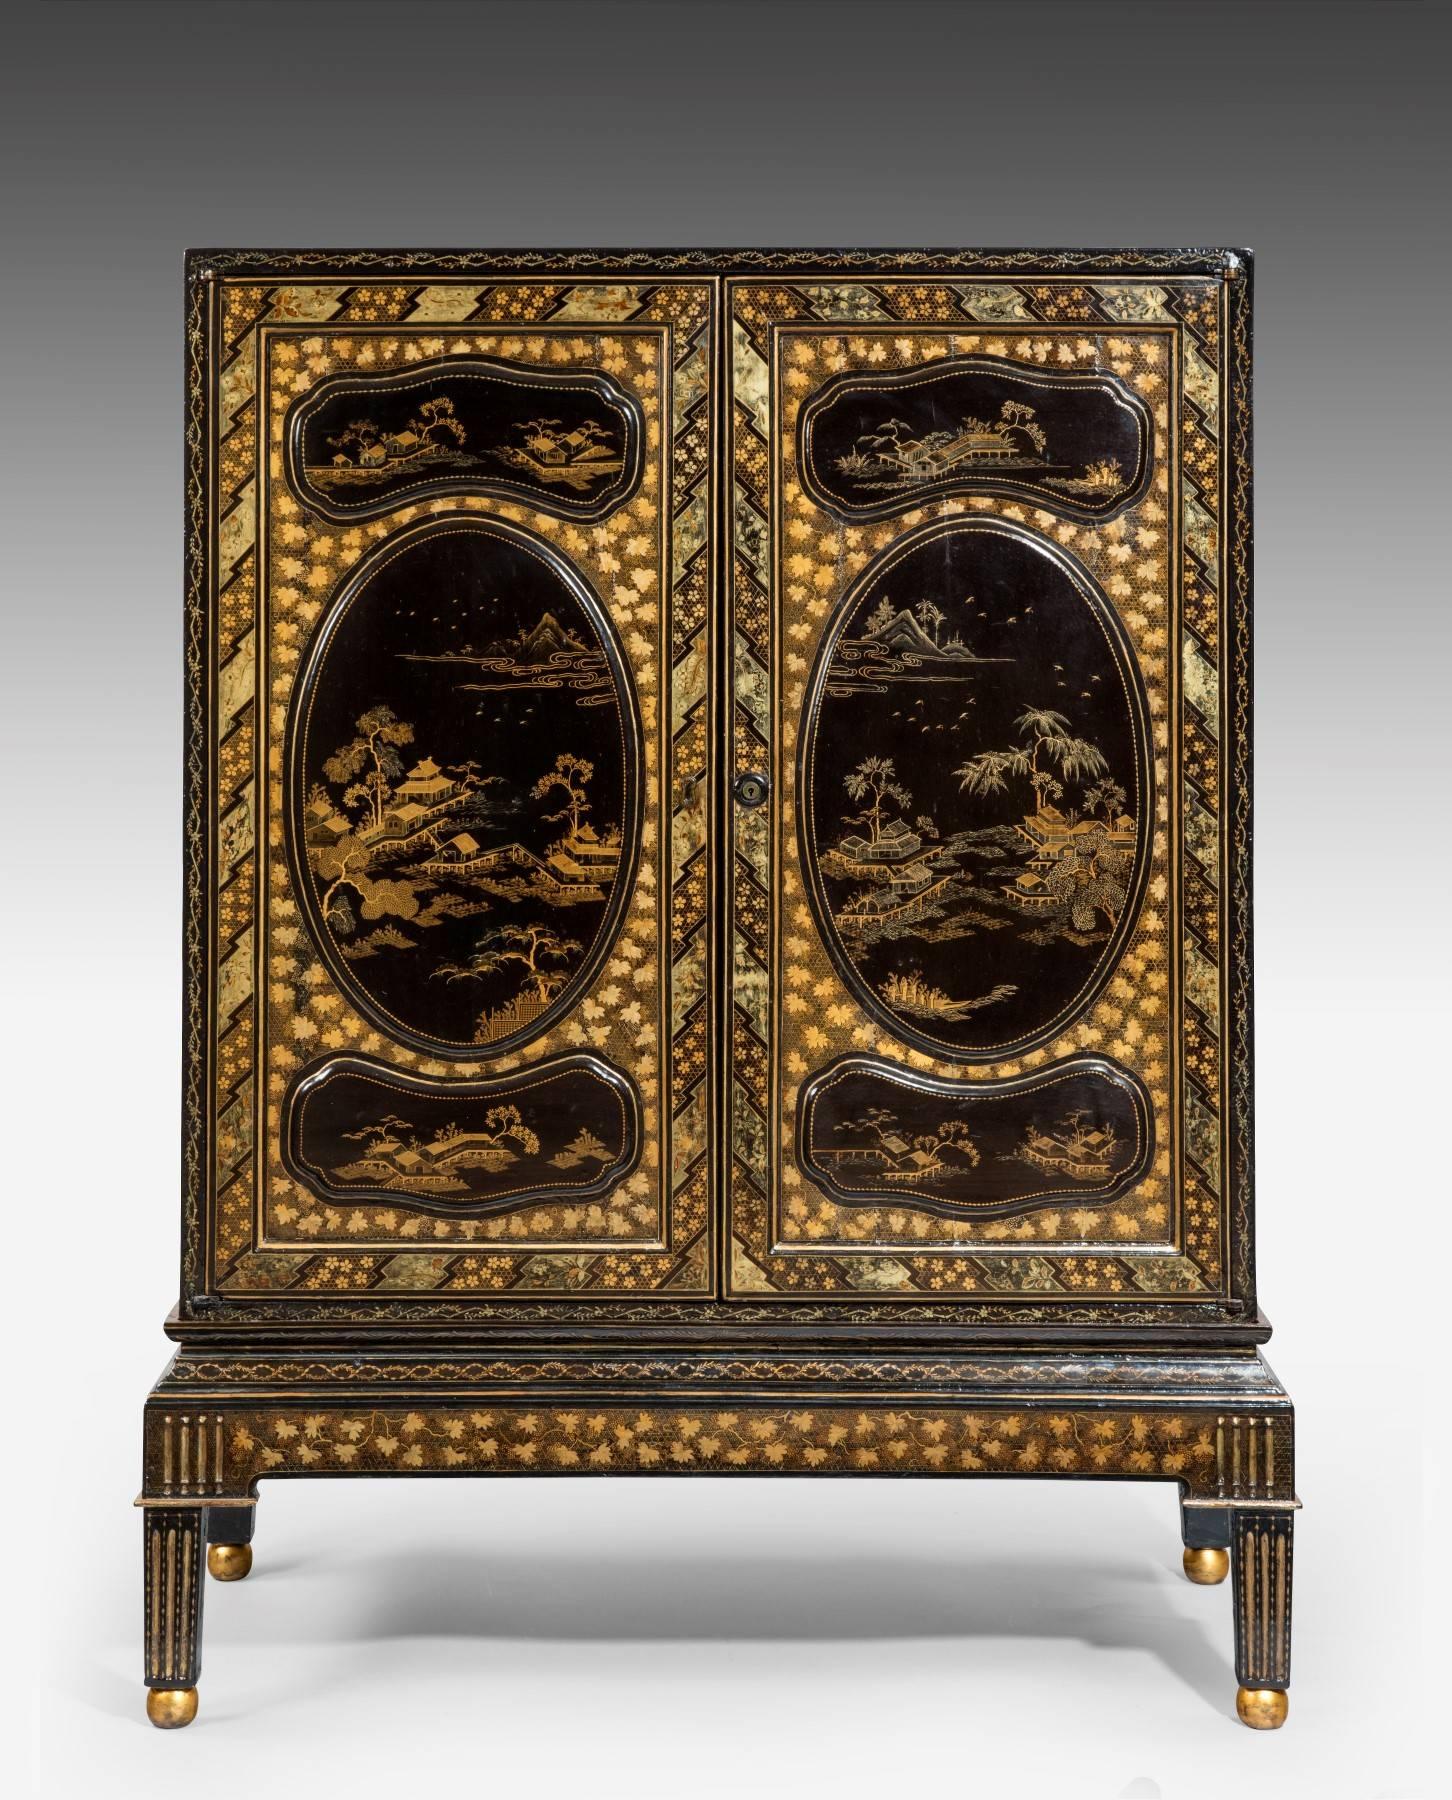 Of simply outstanding quality, this Chinese Export lacquer cabinet is original throughout including the stand to the base. The penwork decoration is simply the best and such is the quality, even the top of the cabinet is decorated. Note should also